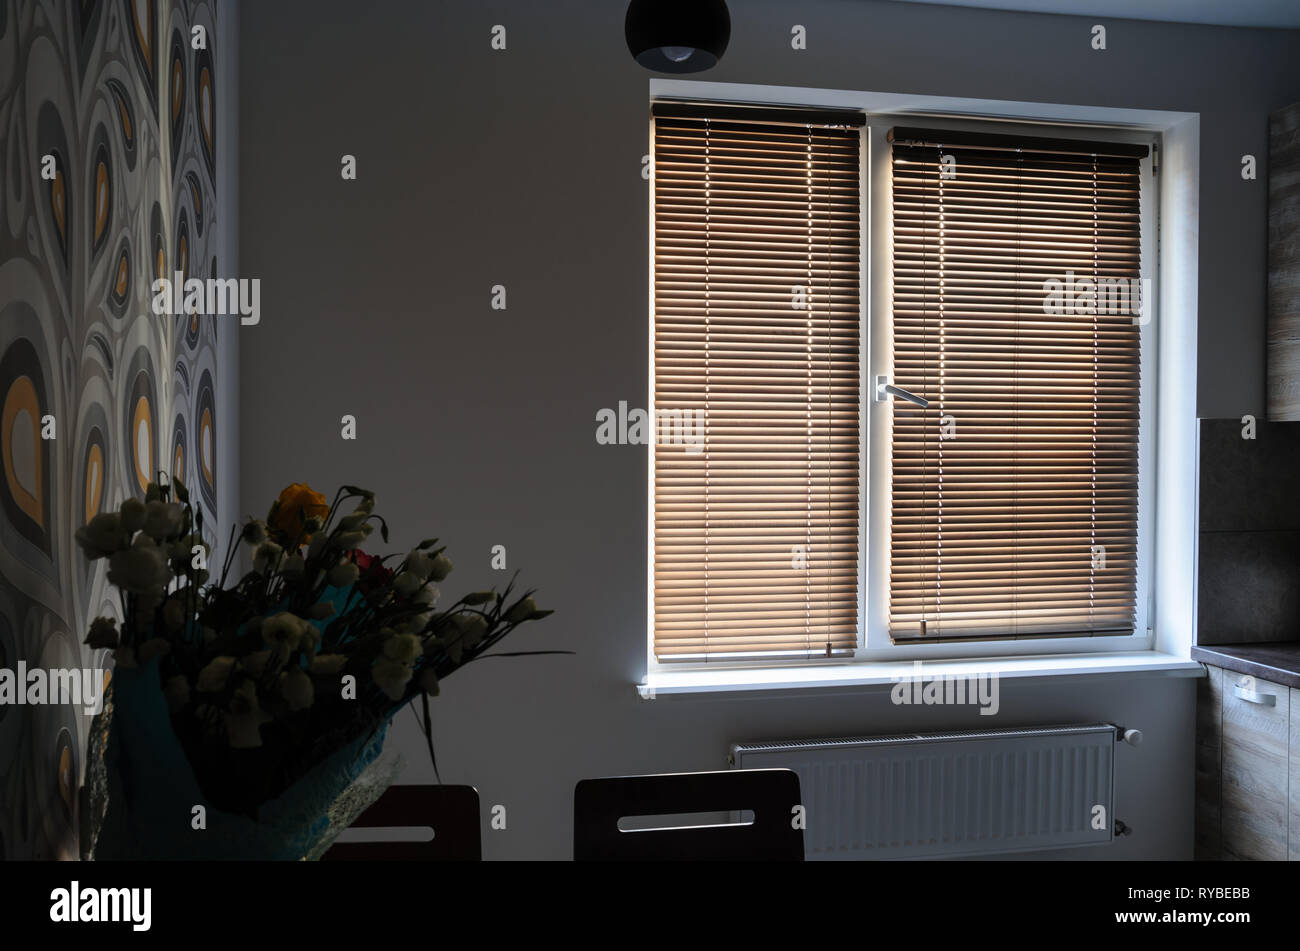 Interior Room With Wooden Shutters On The Window Stock Photo